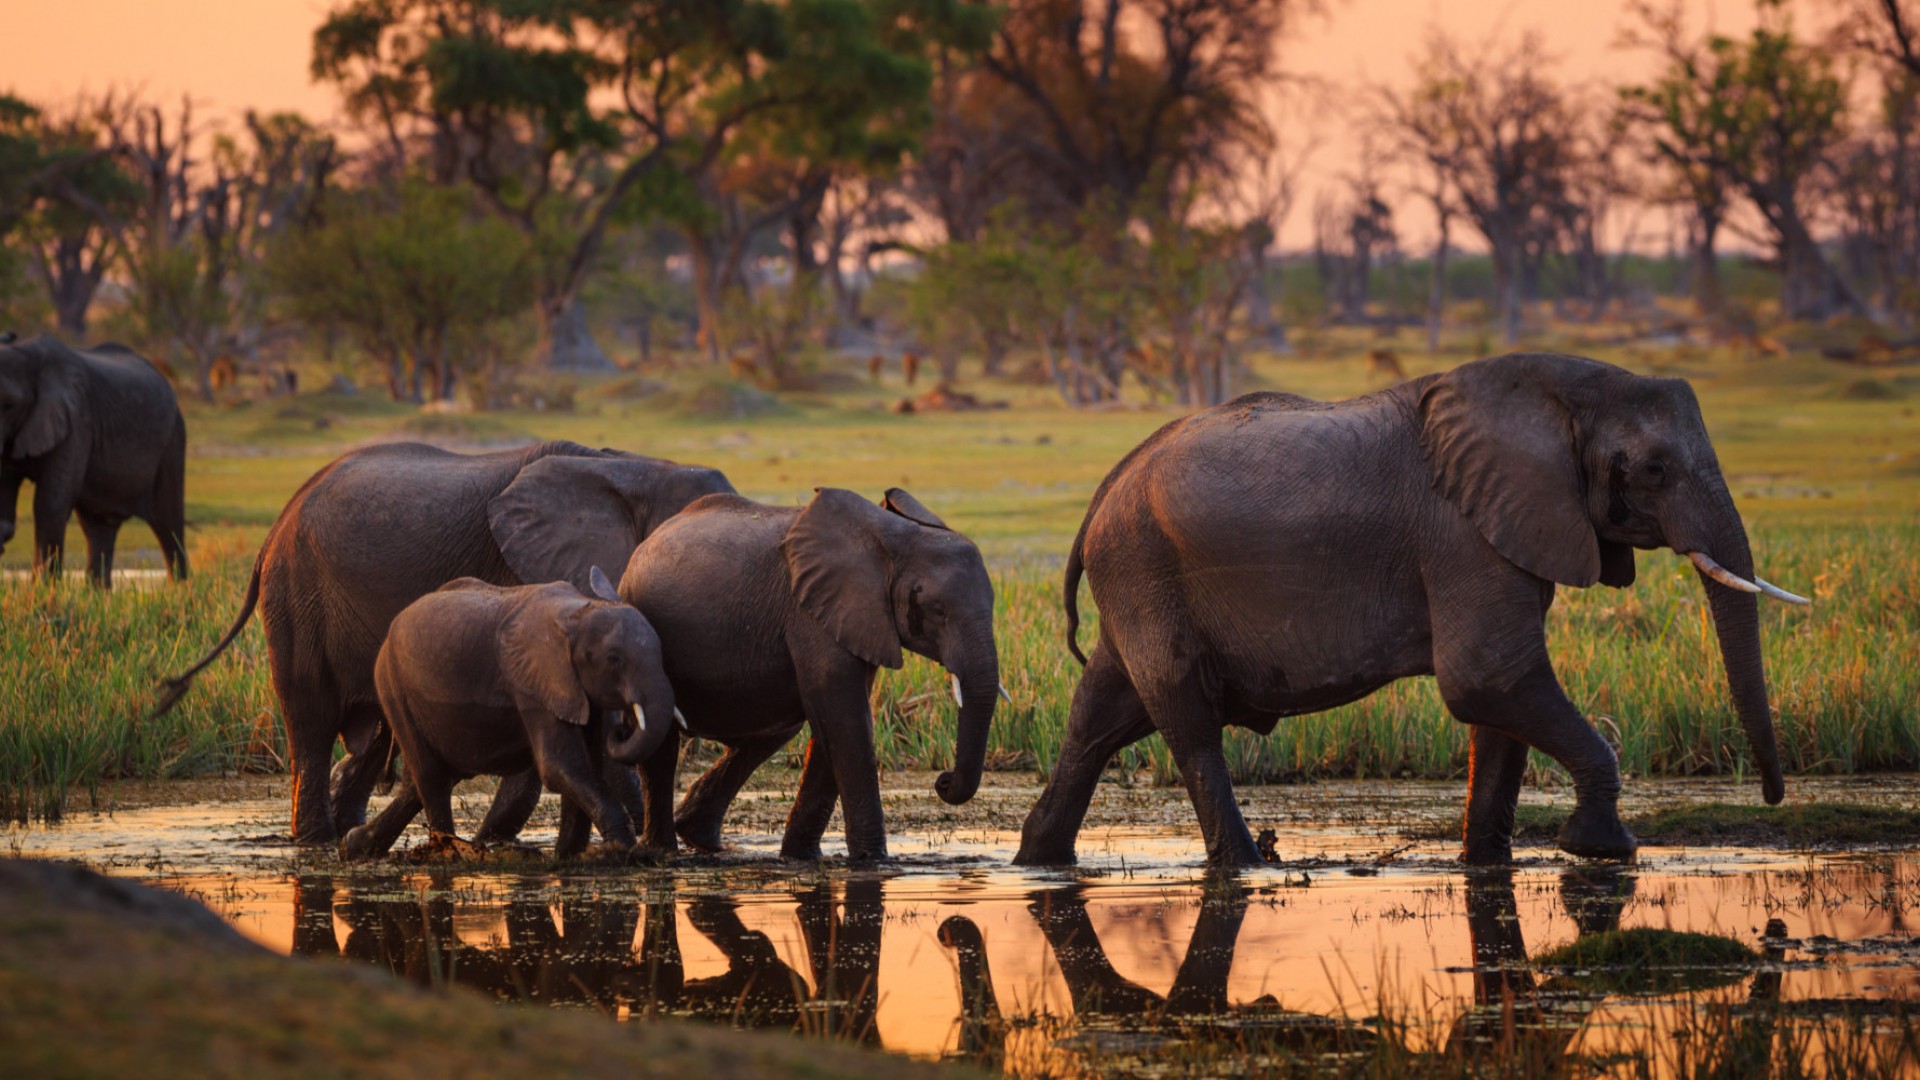 Elephants in water at sunset